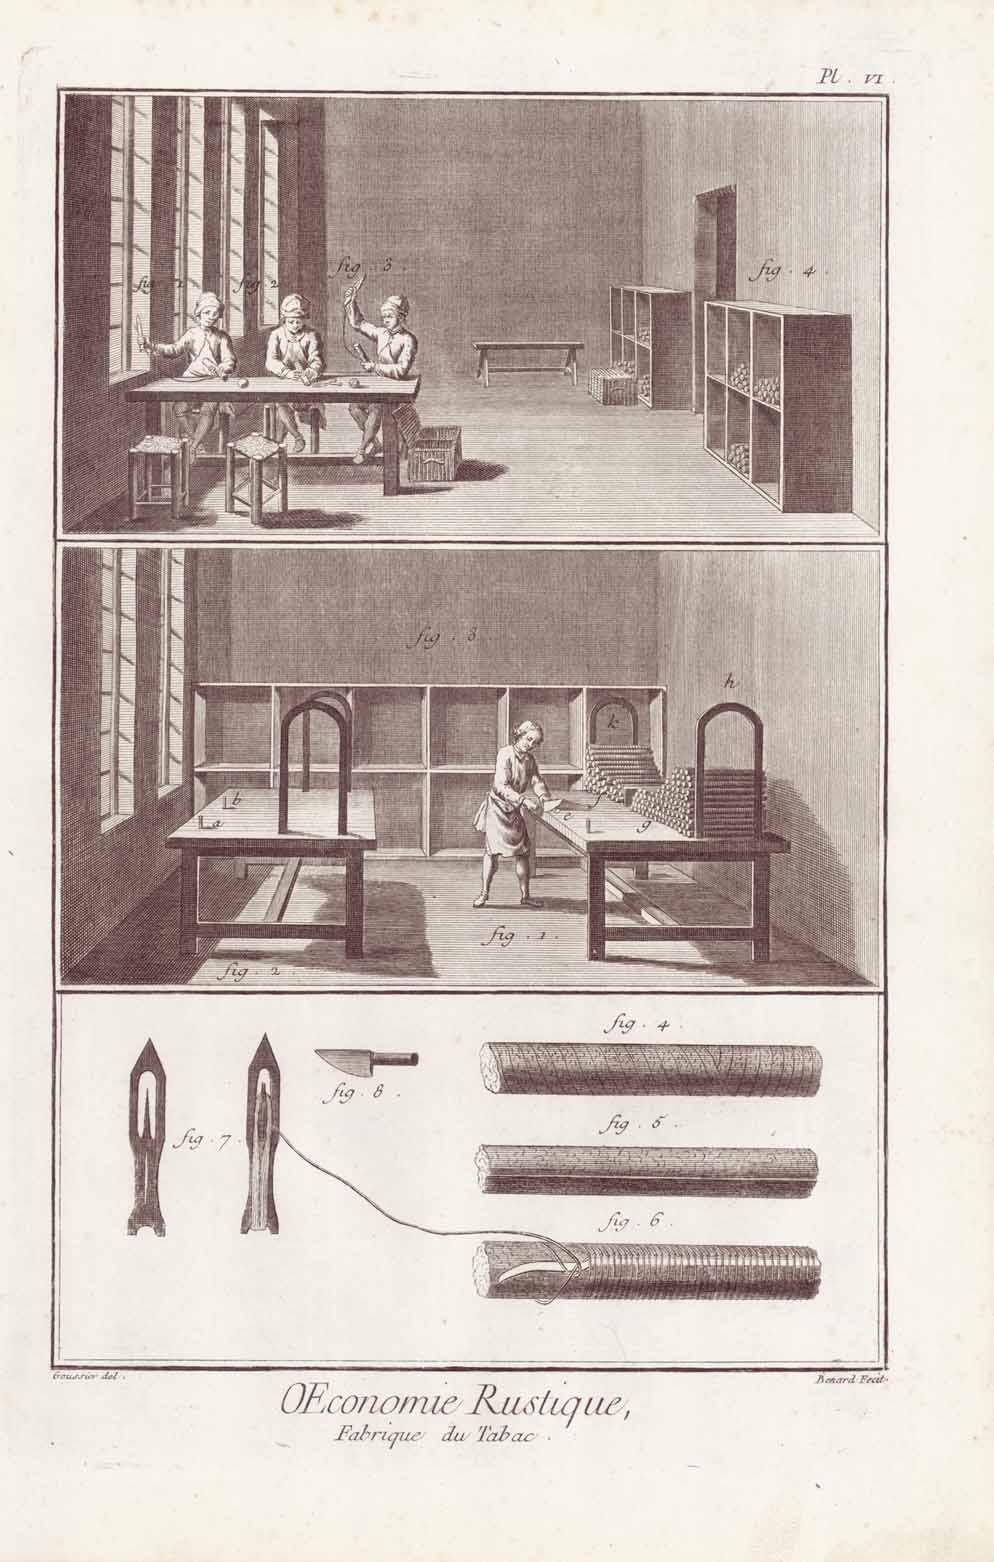 Professions, Tabac, Tobacco, Smoking, Rauchen, Cigarettes, Cigars  Complete series of 6 copper etchings by Robert Benard (1734-1777)  Published in "Encyclopedie" von Denis Diderot (1713-1784)  und Jean-Baptiste le Rond d'Alembert (1717-1783)  Paris 1751-1780  Original antique print  